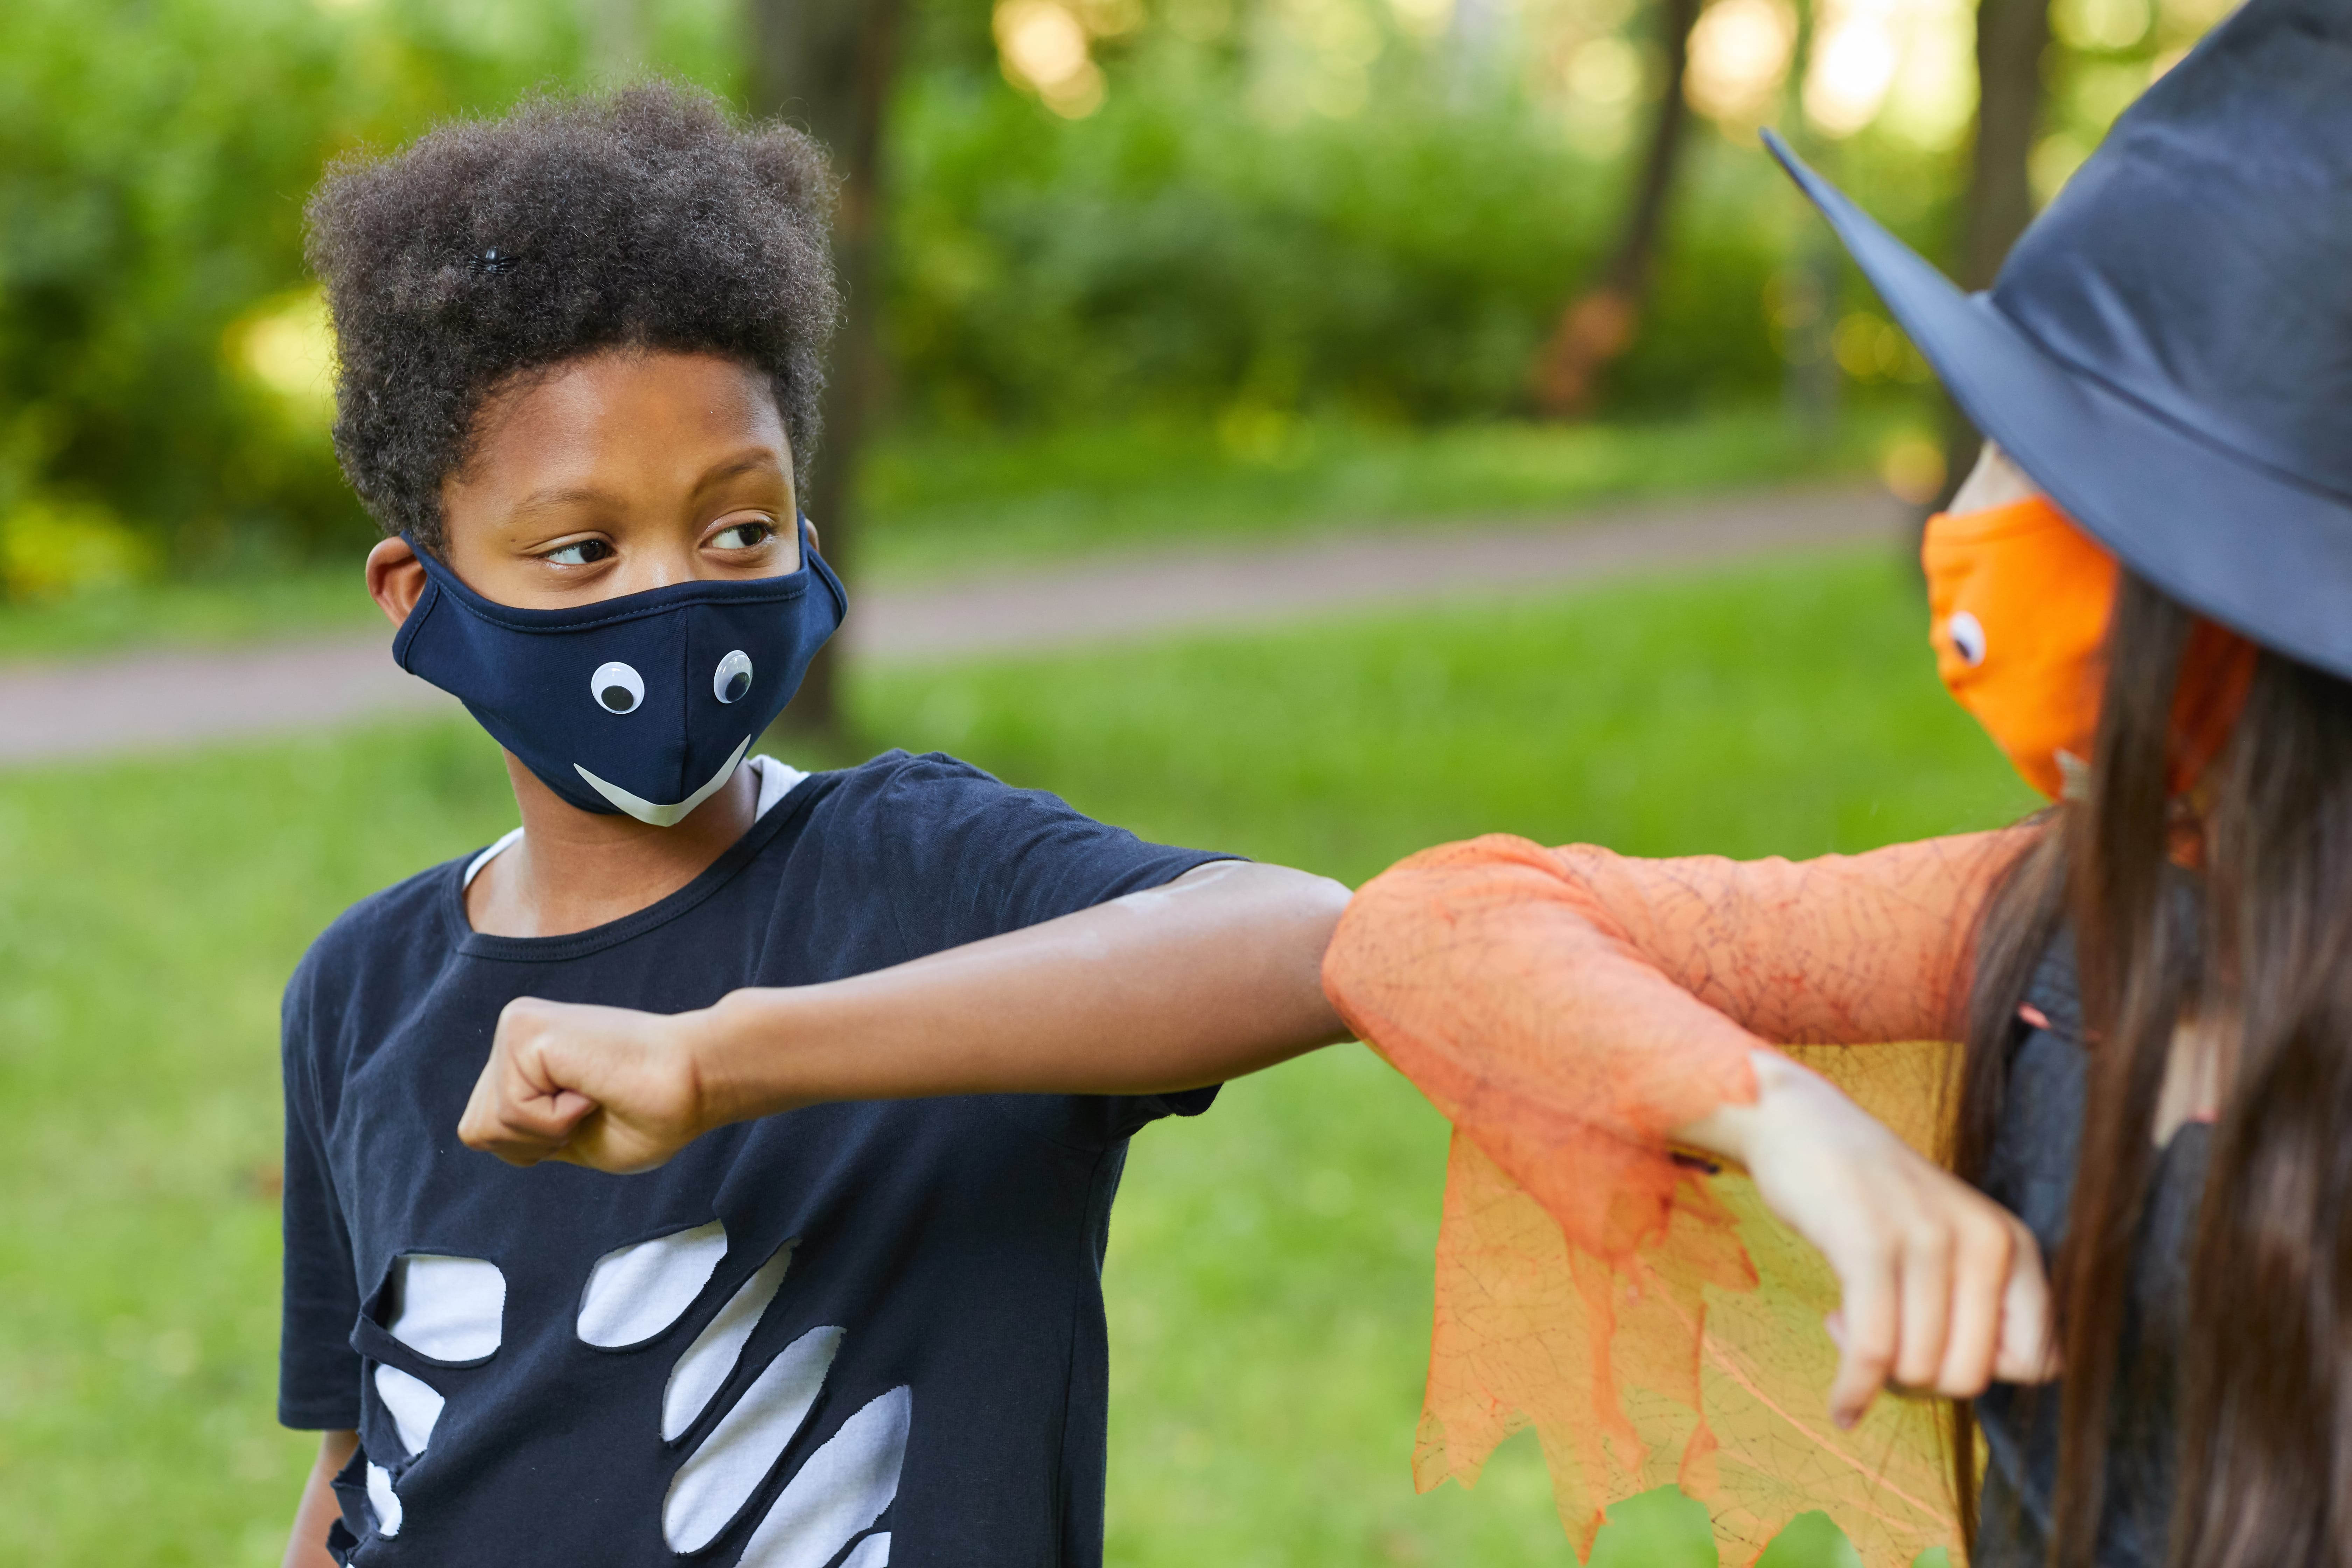 african-boy-costume-playing-with-his-friend-park-outdoors.jpg